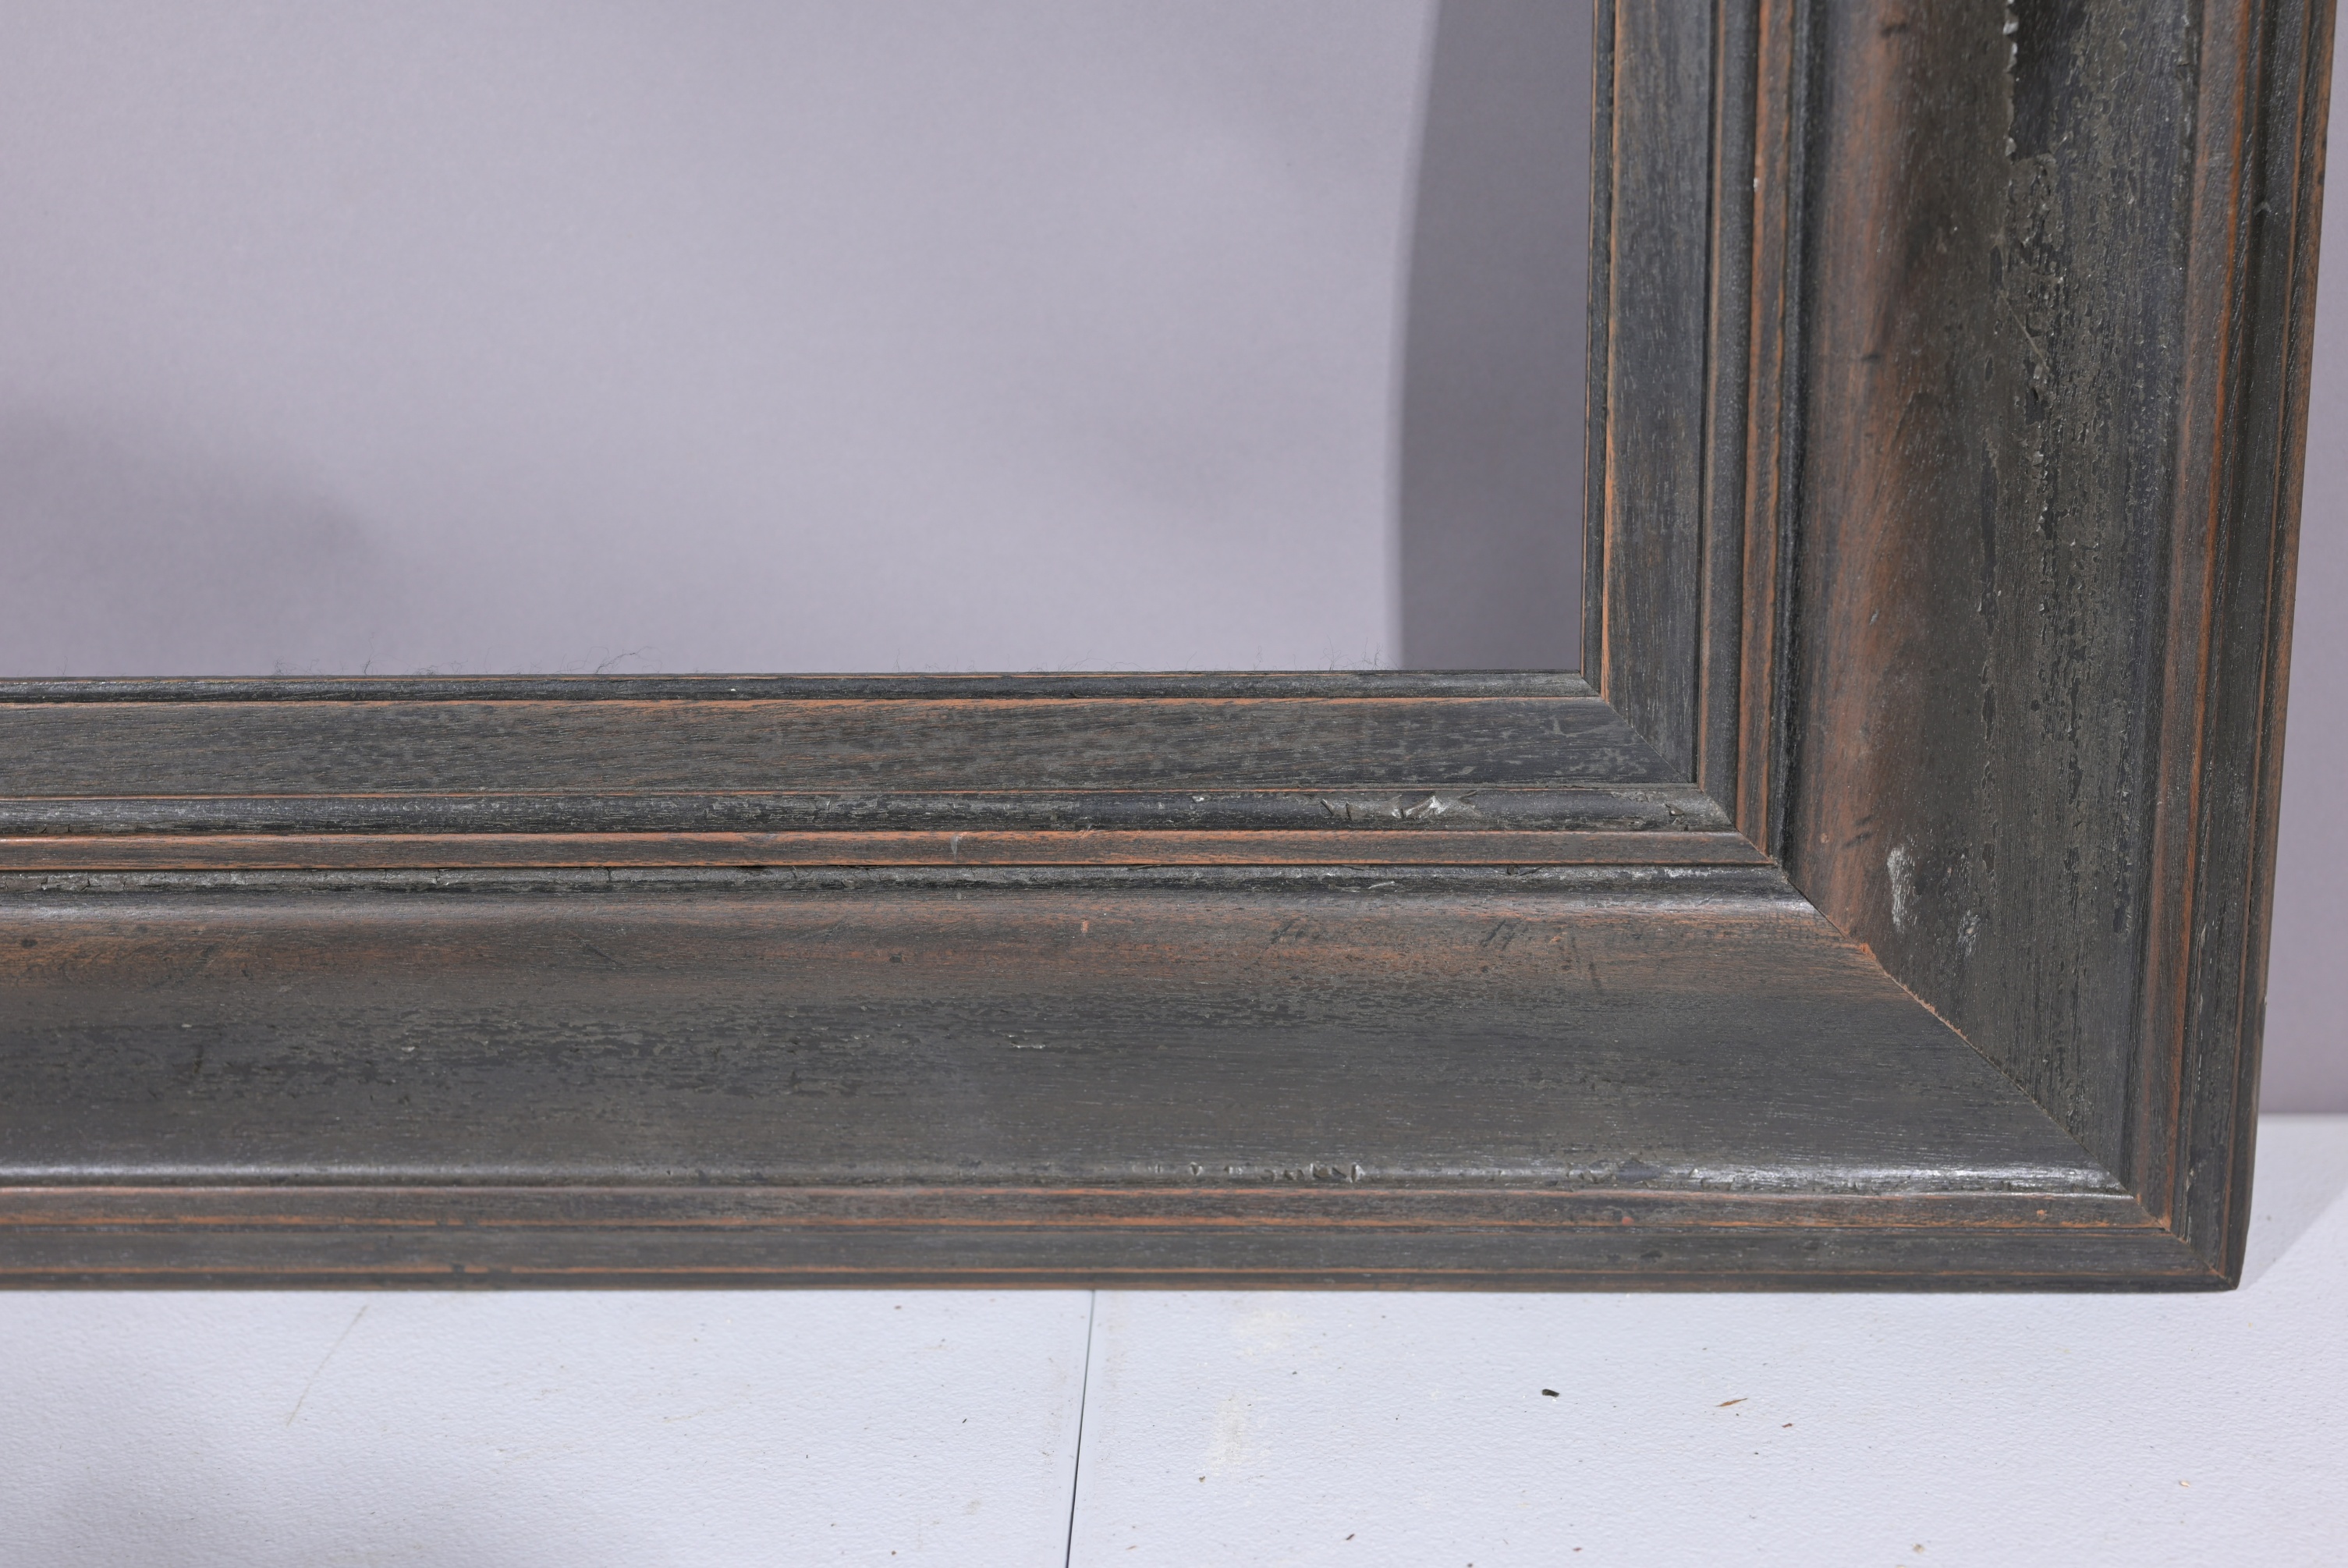 c.1900's Wooden Frame - 43 x 31.25 - Image 5 of 9